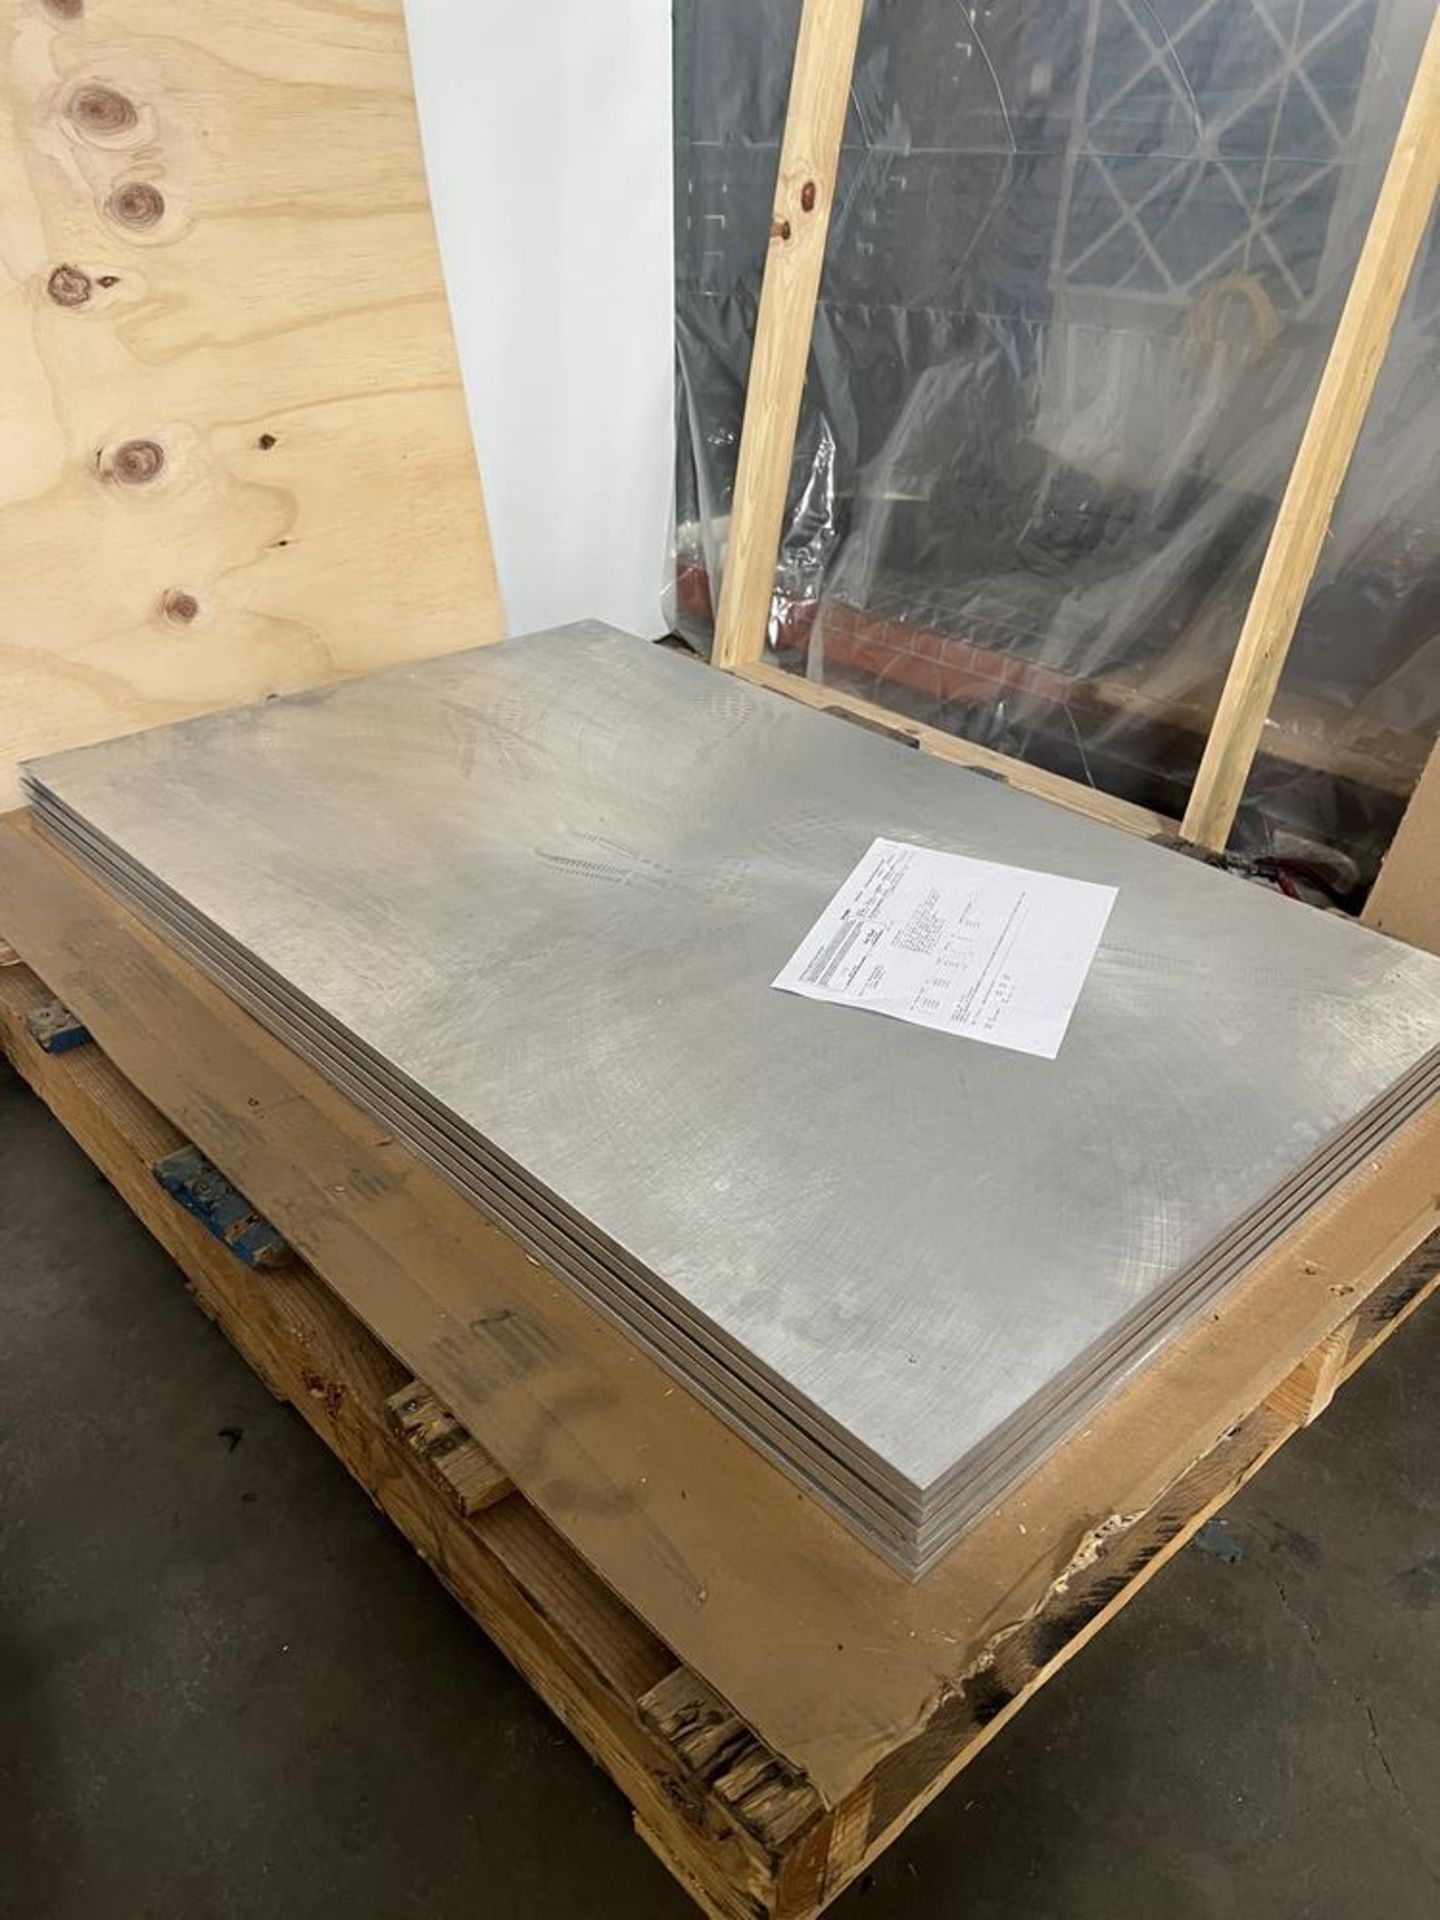 (5) Precision Ground Aluminum Plate 44" x 28" x 1/2" With Certified Inspection Report - Image 2 of 4